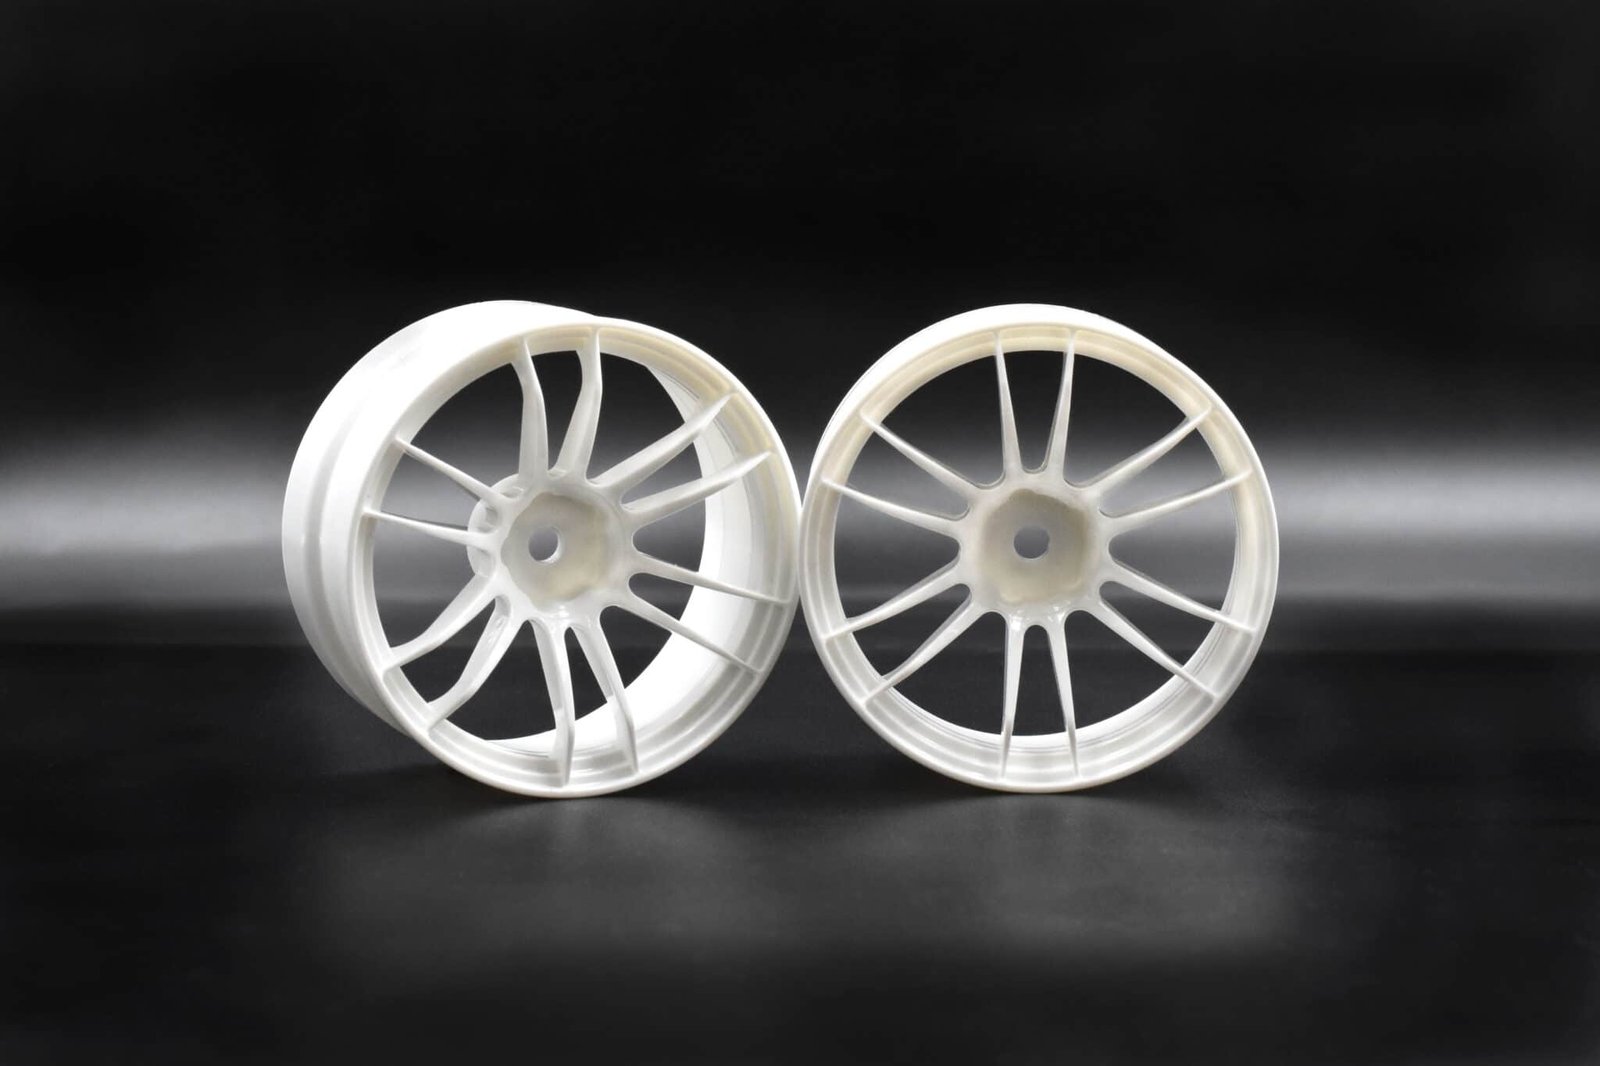 Reve D Competition wheel UL12 White (6mm Offset) RW-UL12W6